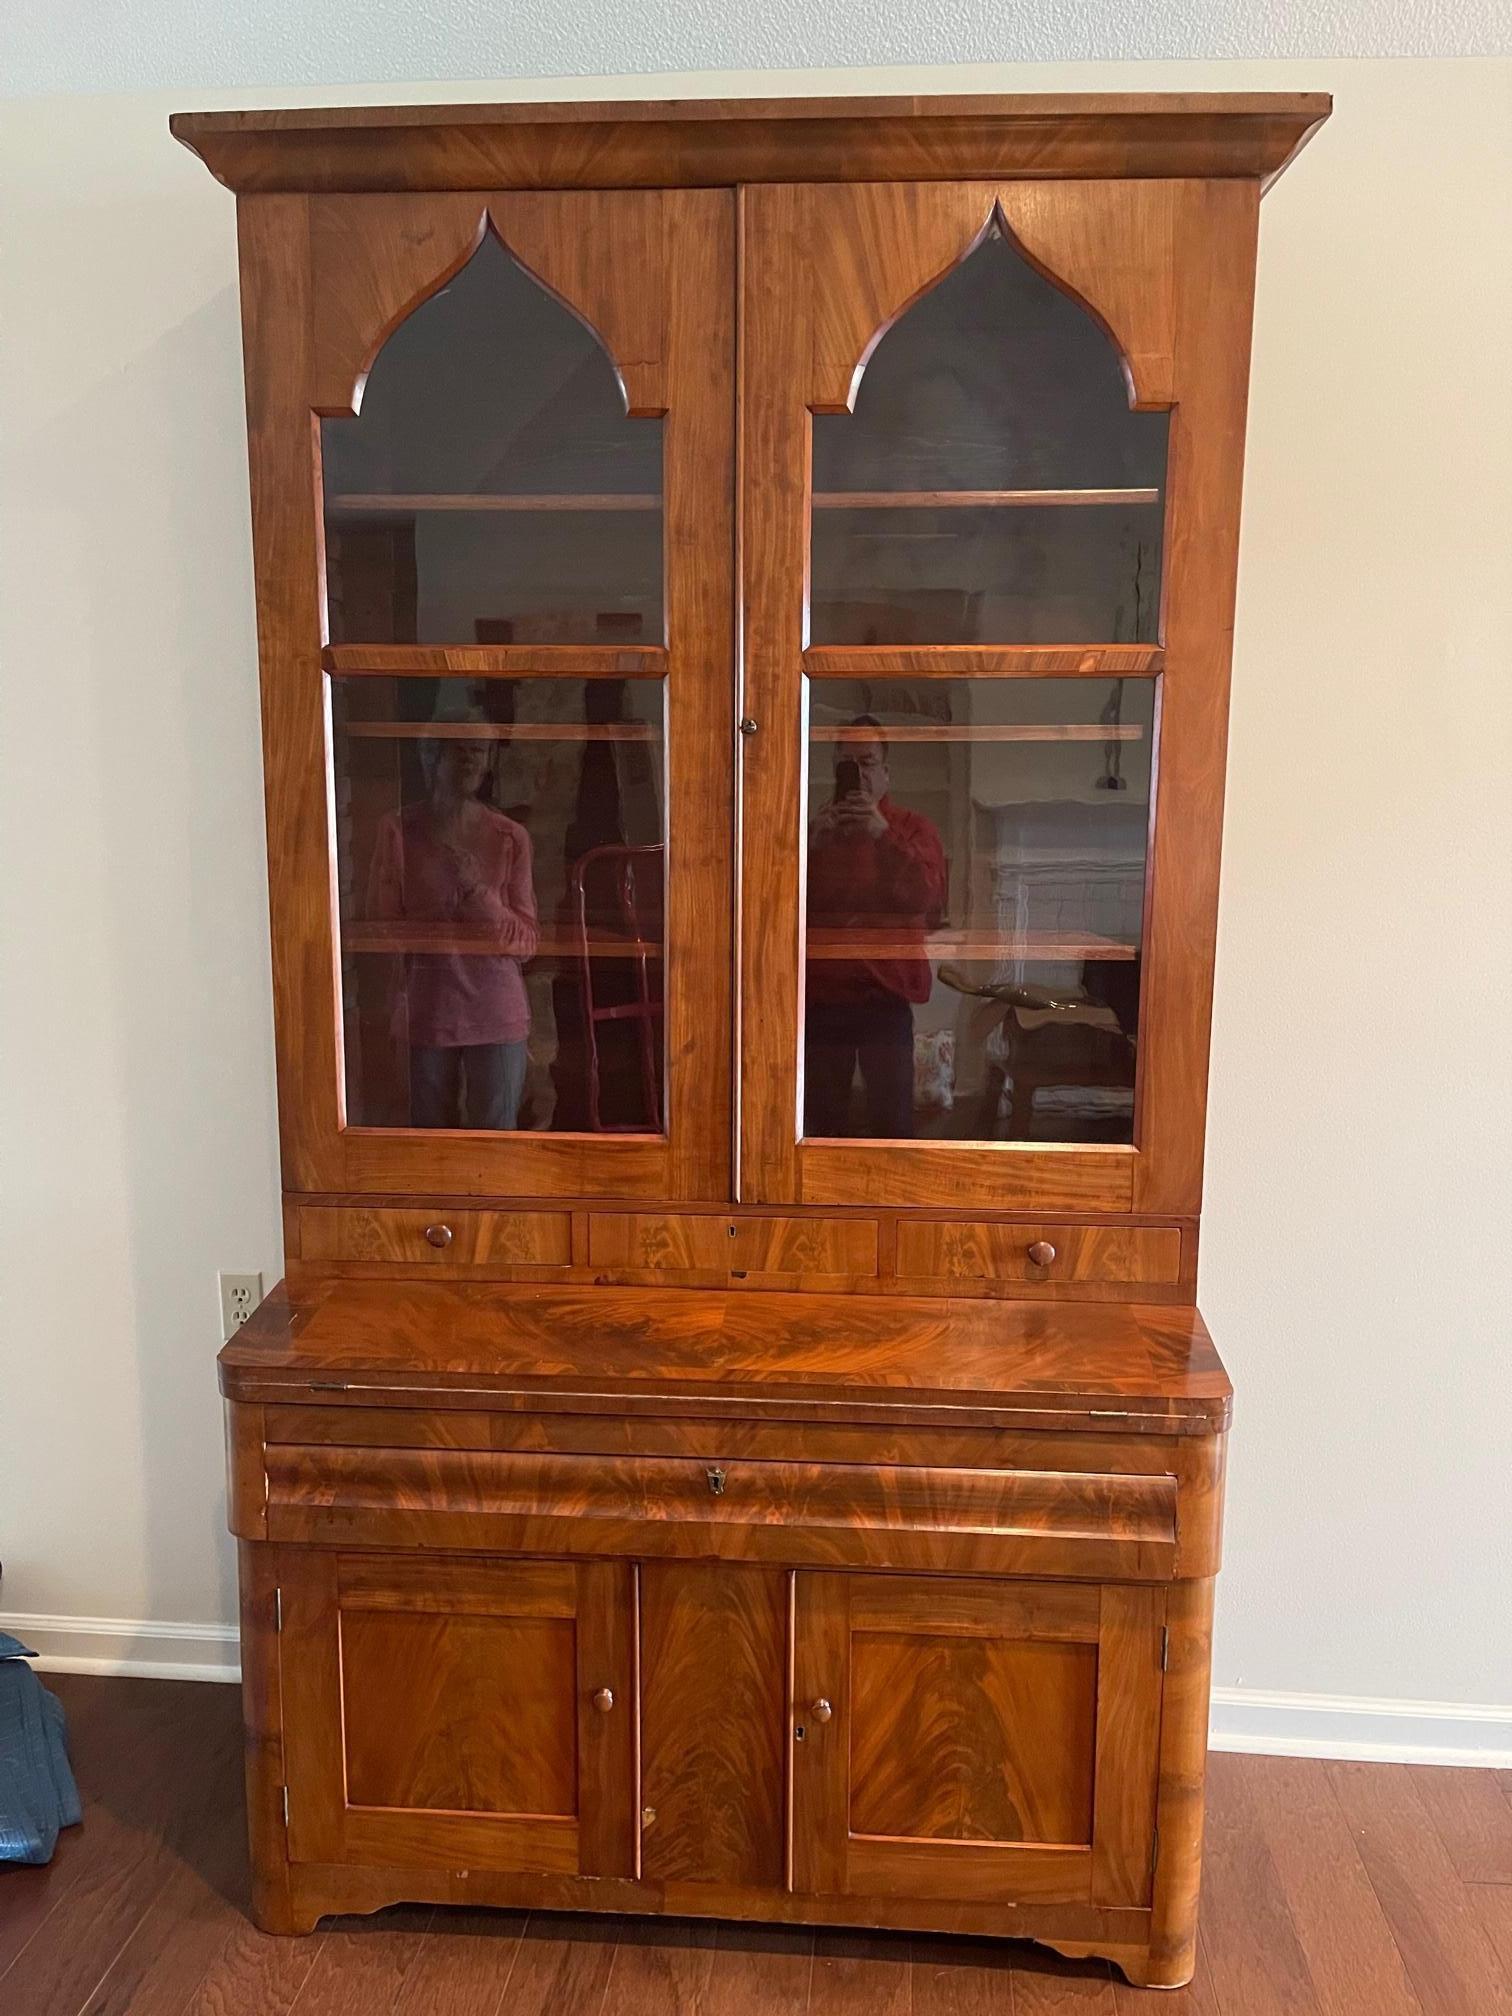 English secretary with glass door and three glass shelves, leather inlay on desk surface, original glass panels, 19th Century. There is one crack on one of the glass panels which we can replace, but would like to give the opportunity to the client